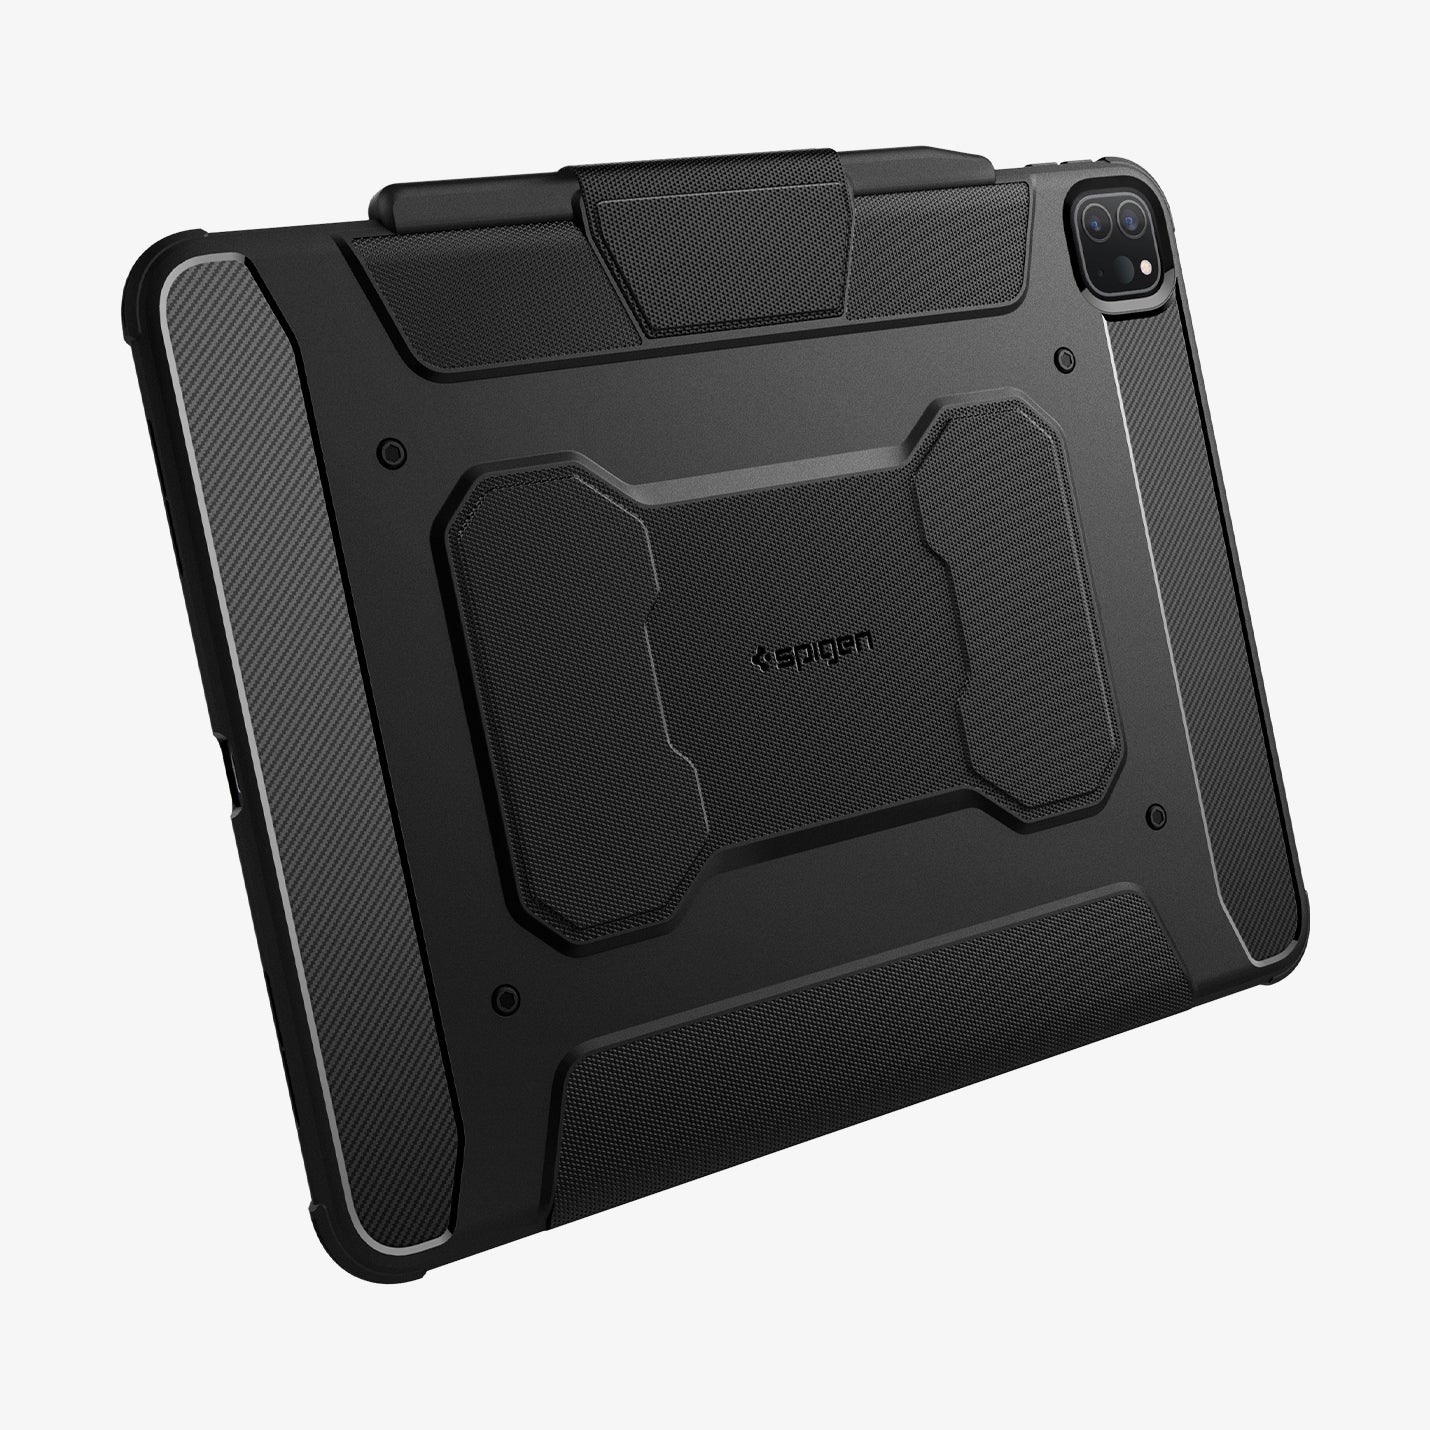 ACS07007 - iPad Pro 12.9-inch Case Rugged Armor Pro in Black showing the back in landscape position